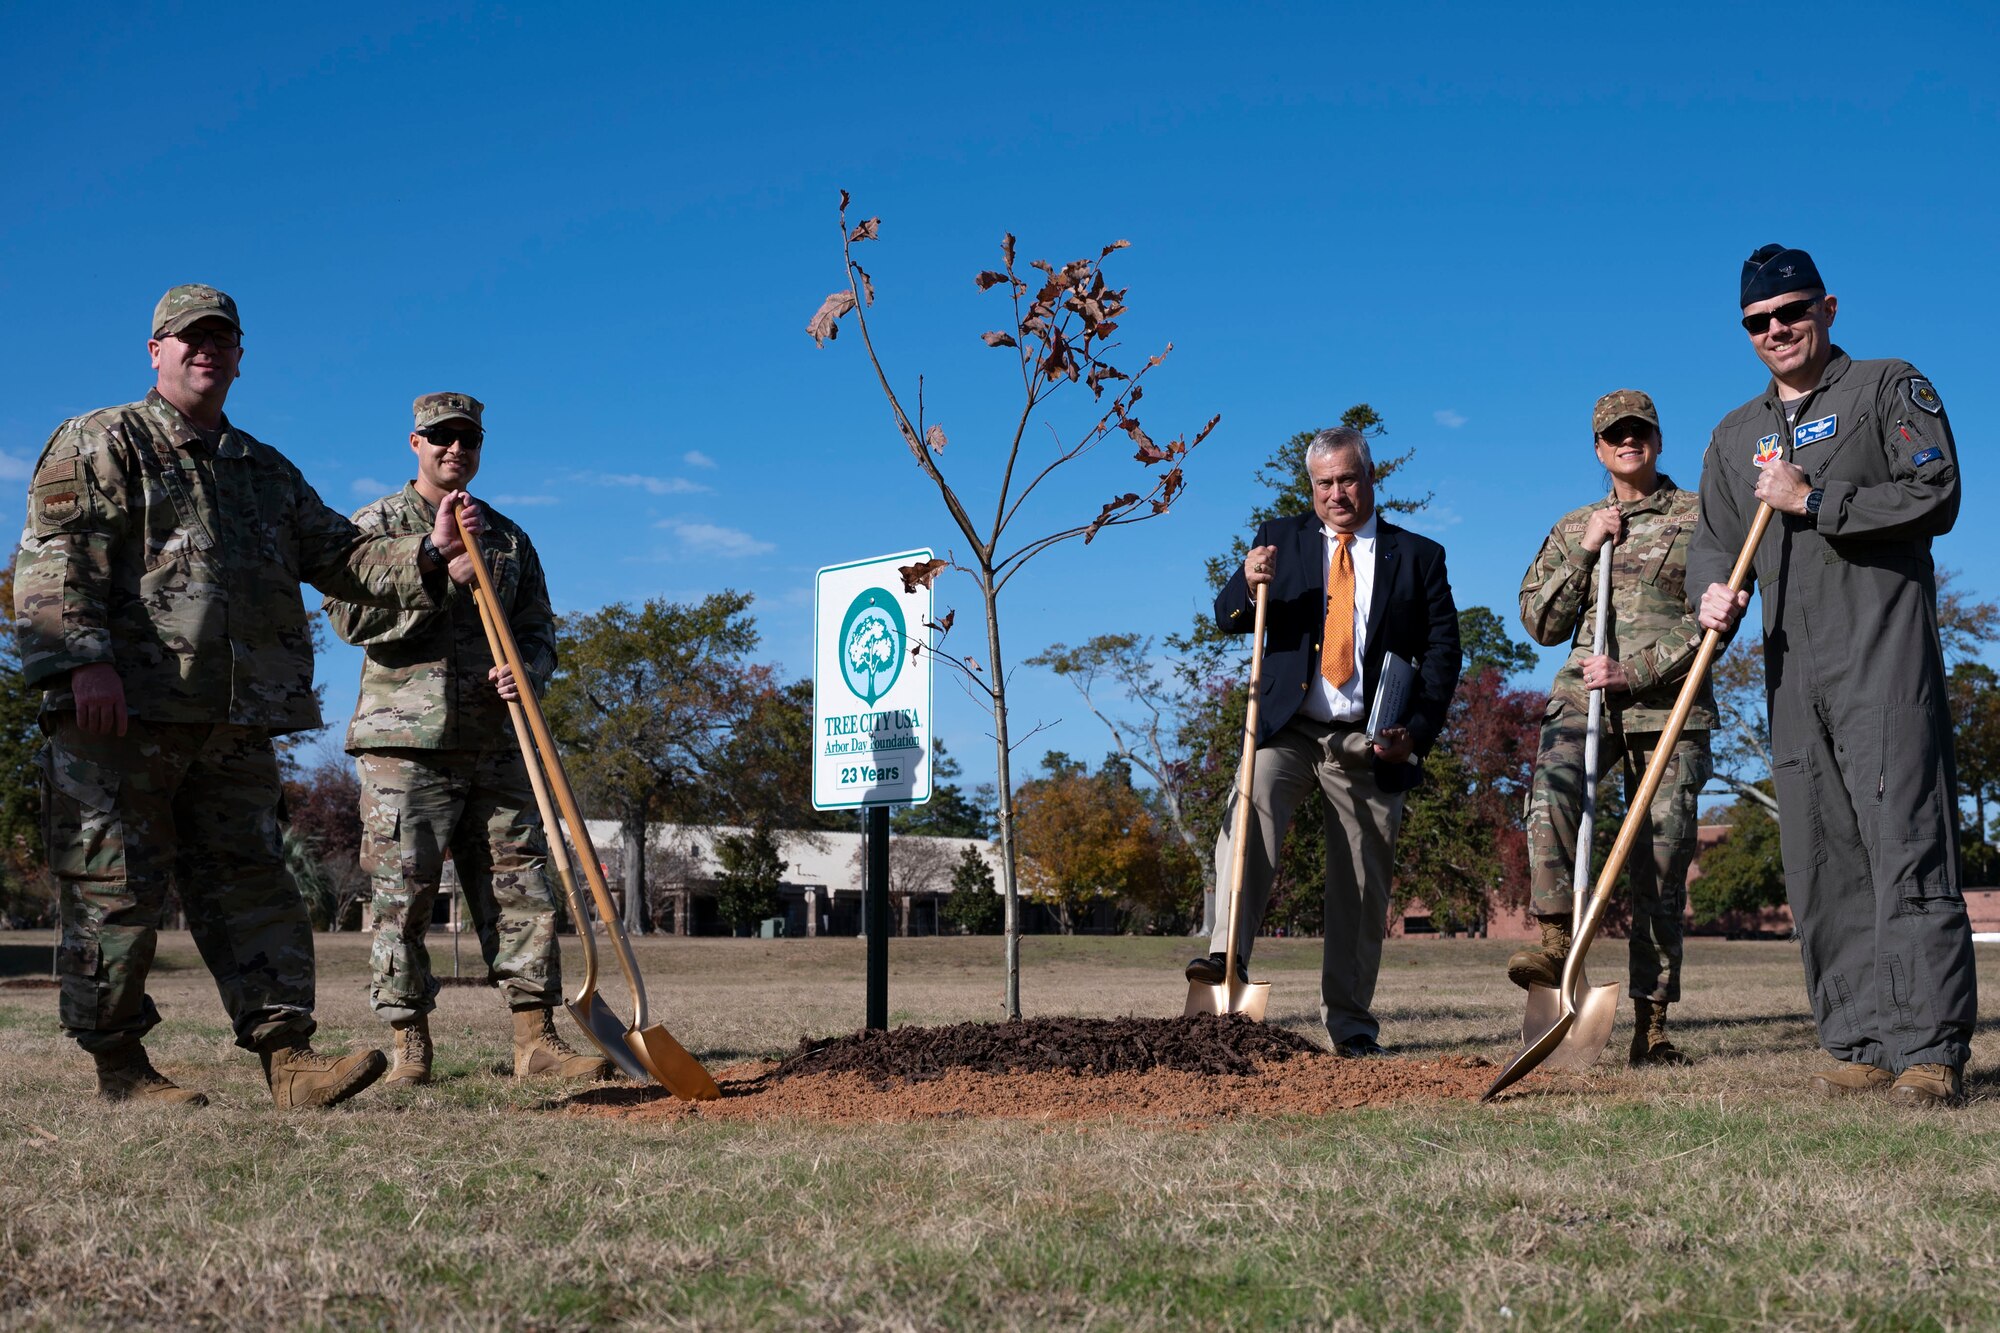 20th Fighter Wing leadership pose for a photo with ceremonial shovels during an Arbor Day ceremony